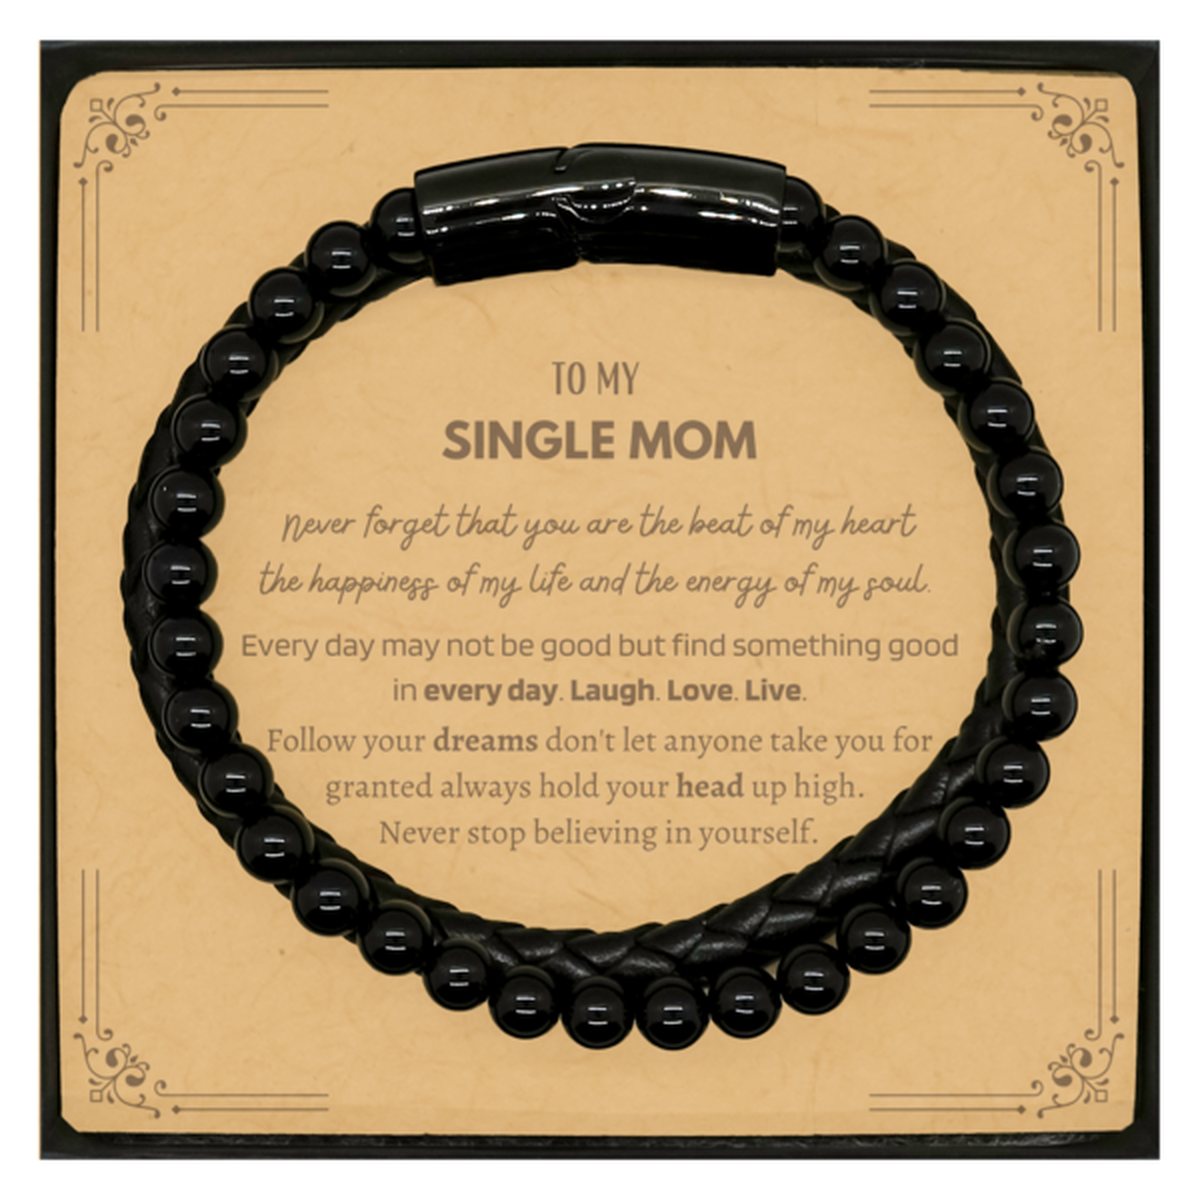 To My Single Mom Message Card Gifts, Christmas Single Mom Stone Leather Bracelets Present, Birthday Unique Motivational For Single Mom, To My Single Mom Never forget that you are the beat of my heart the happiness of my life and the energy of my soul